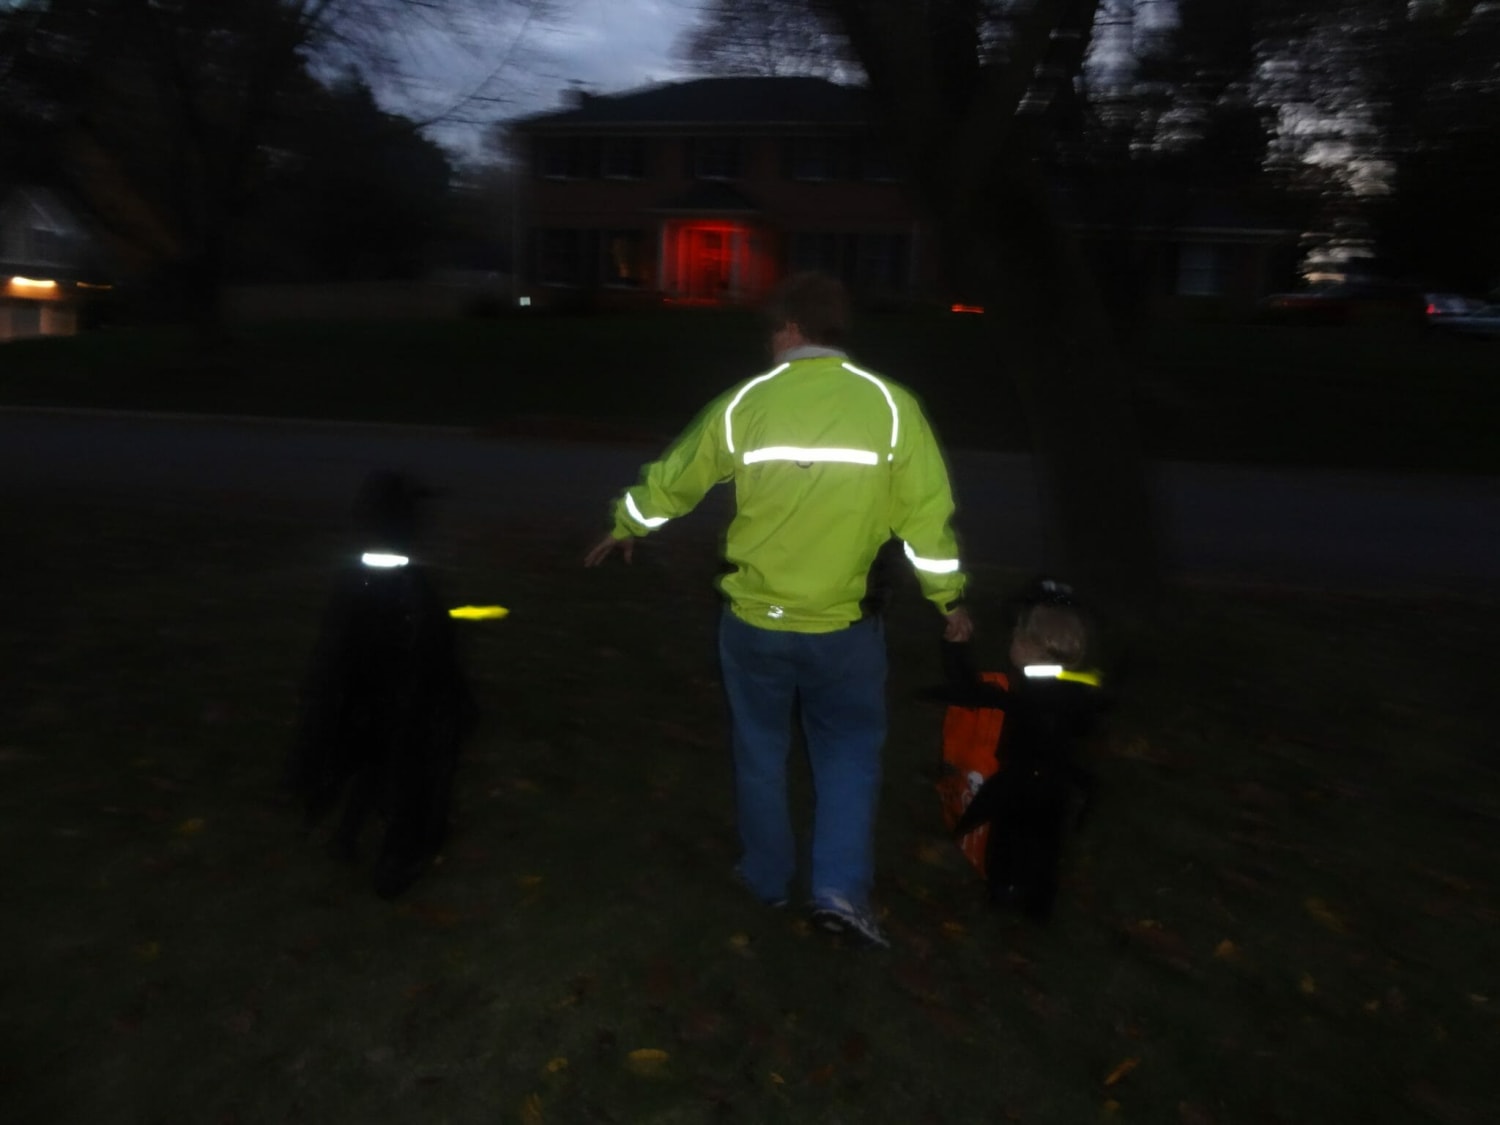 Halloween Must Haves: Trick-or-Treat Safety Tips for Parents